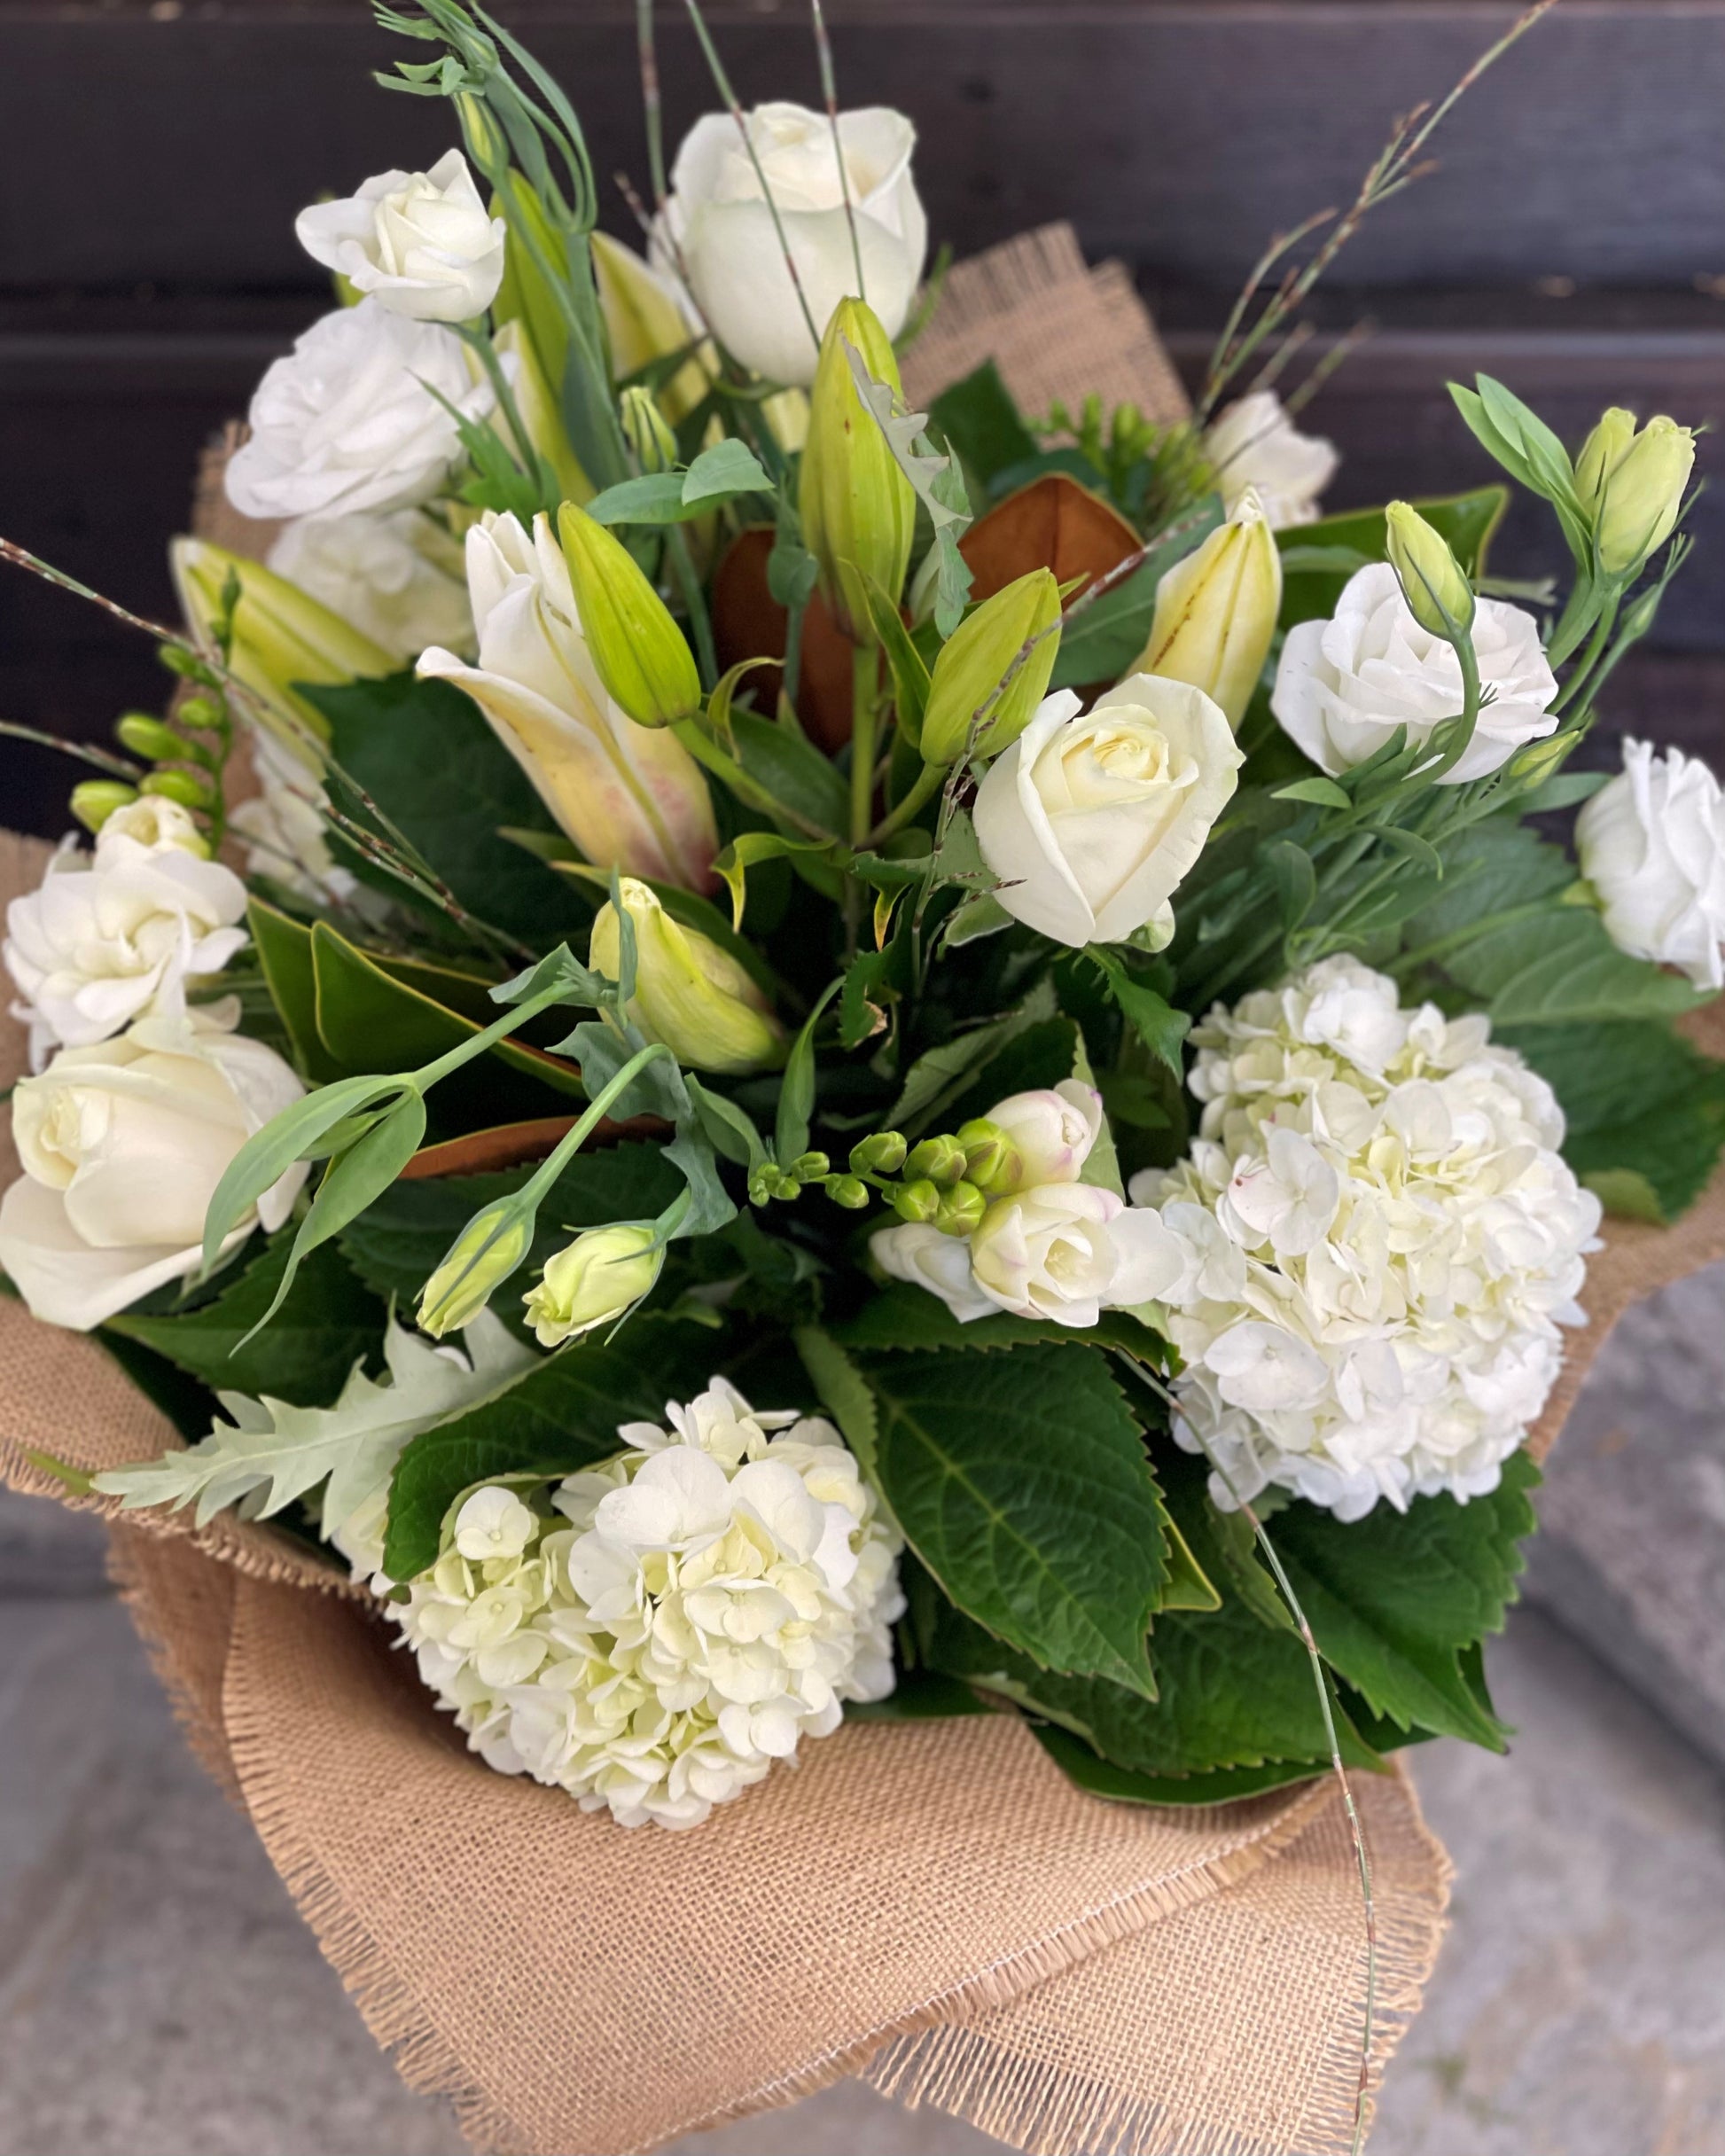 Flowersetc, Floral, Bouquet, Flowers, Gifts, Posy, Posey, Wellington, Lower Hutt, Upper Hutt, Petone, Eastbourne, Bright, Pastel, Florist, Florists, Creative, Flair, custom, bespoke, bunch, bunches, scent, plants, Indoor, wedding, sympathy, funeral, arrangement, floral, seasonal, excellent, elegant, prestige, buttonhole, corsage, gifts for mum, gifts for girlfriend, gifts for friends, white